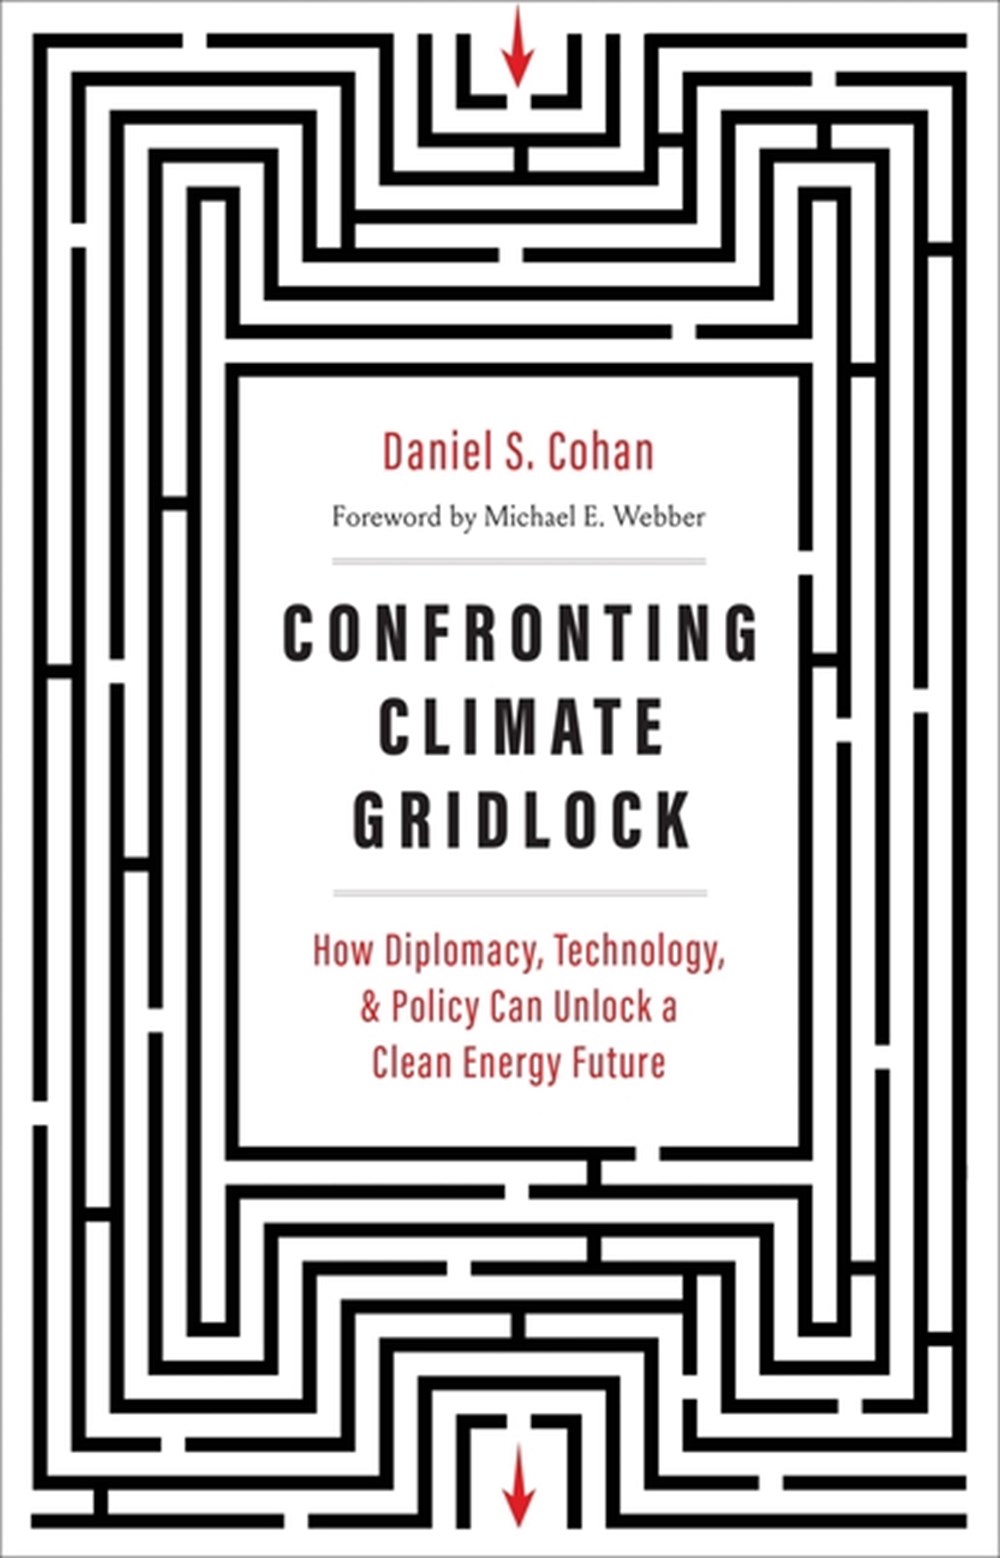 Confronting Climate Gridlock How Diplomacy, Technology, and Policy Can Unlock a Clean Energy Future